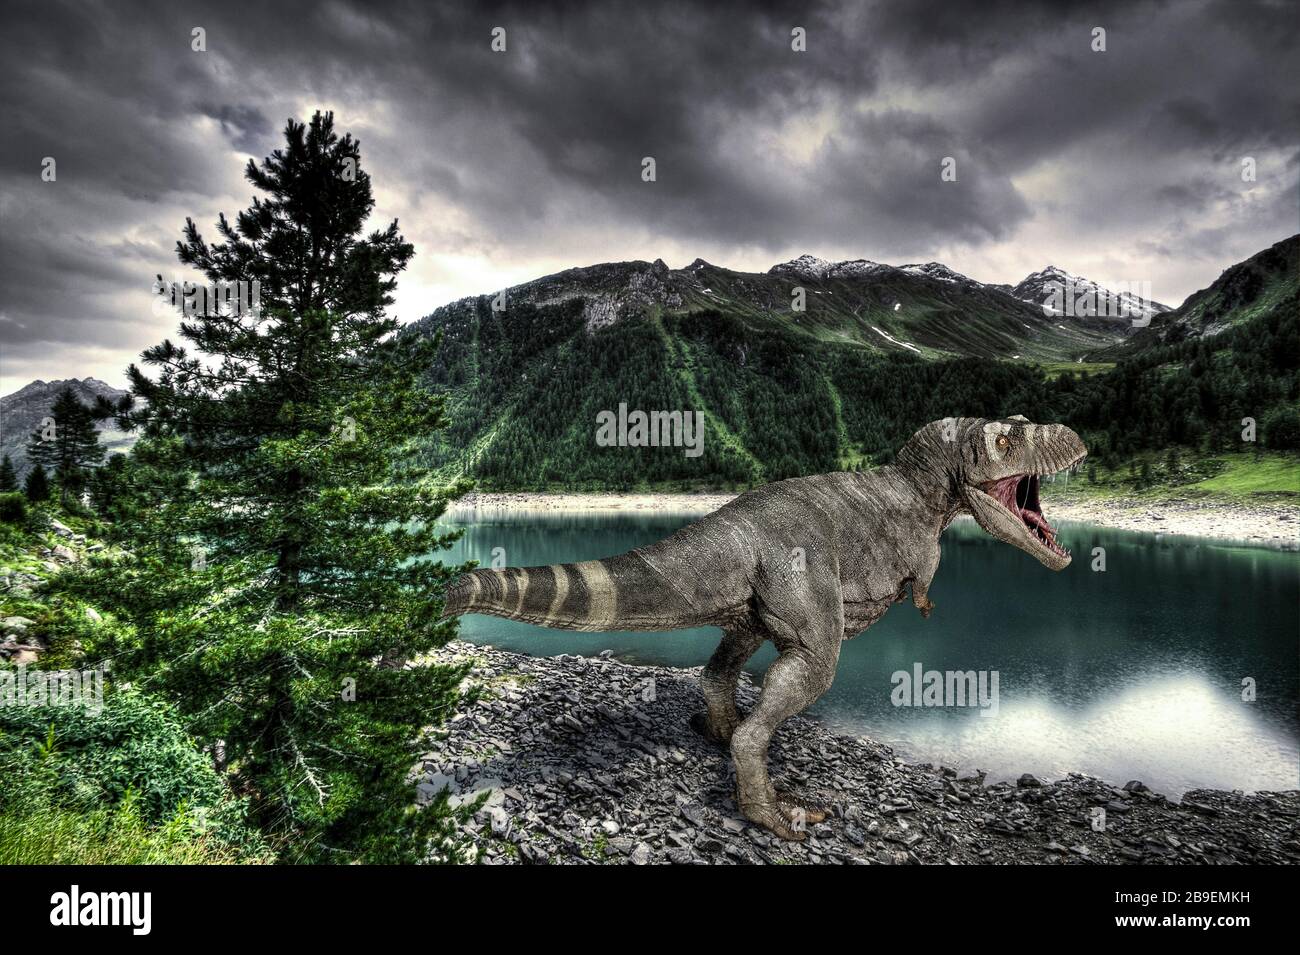 T-Rex dinosaur on a lake shore, with mountains in the background. Stock Photo